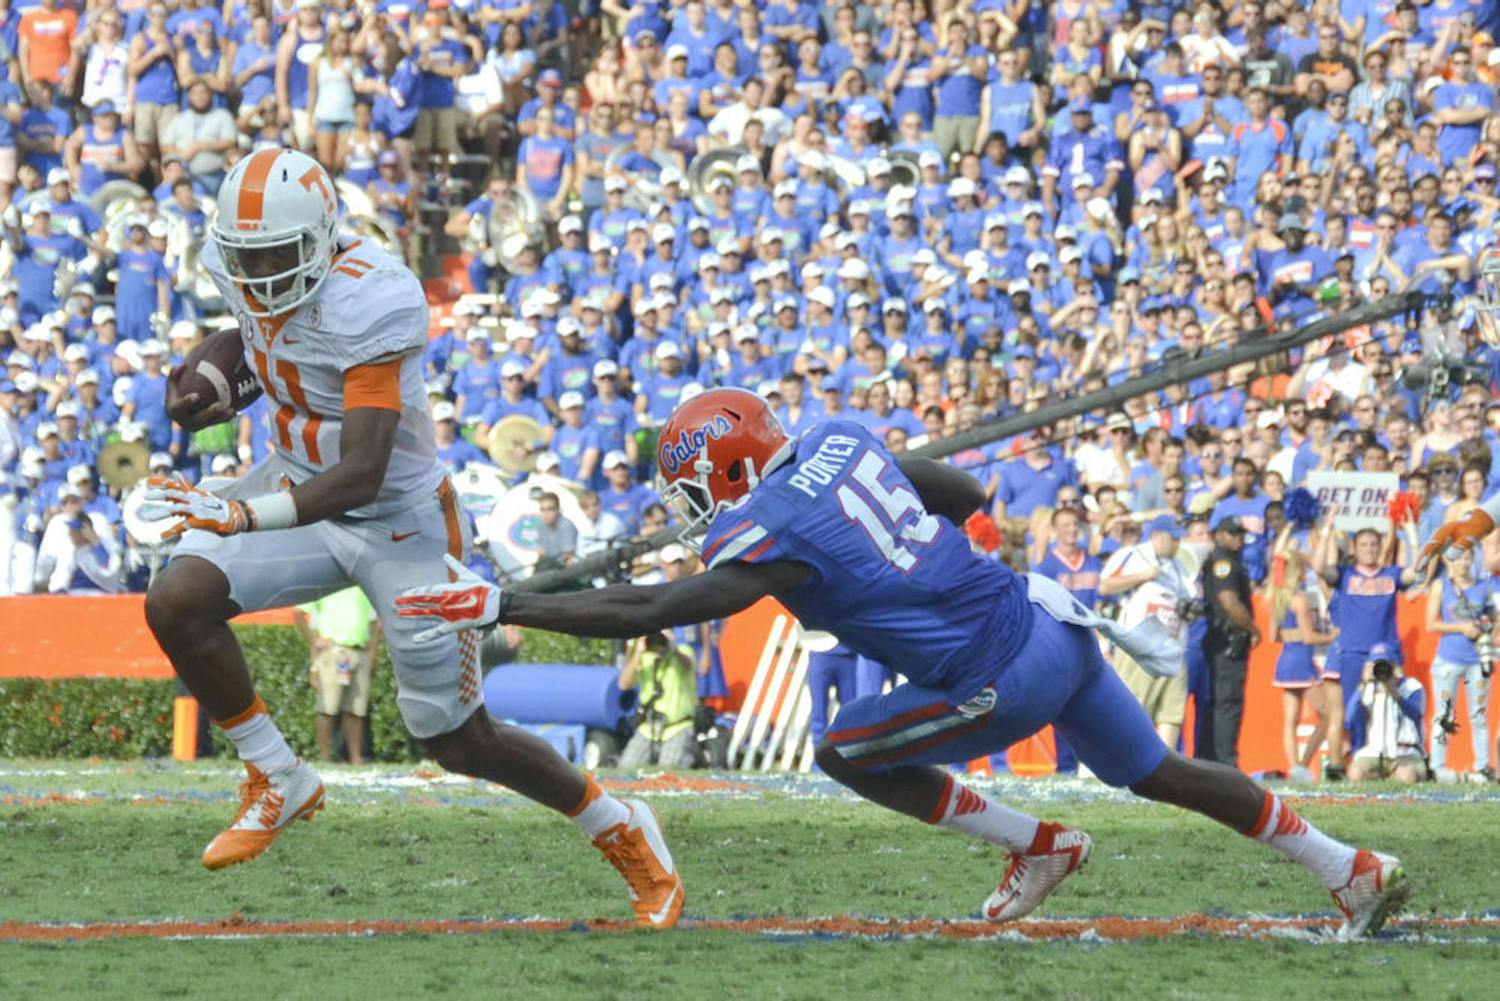 UF defensive back Deiondre Porter misses a tackle on Tennessee quarterback Josh Dobbs during Florida's 28-27 win on Sept. 26, 2015, at Ben Hill Griffin Stadium.